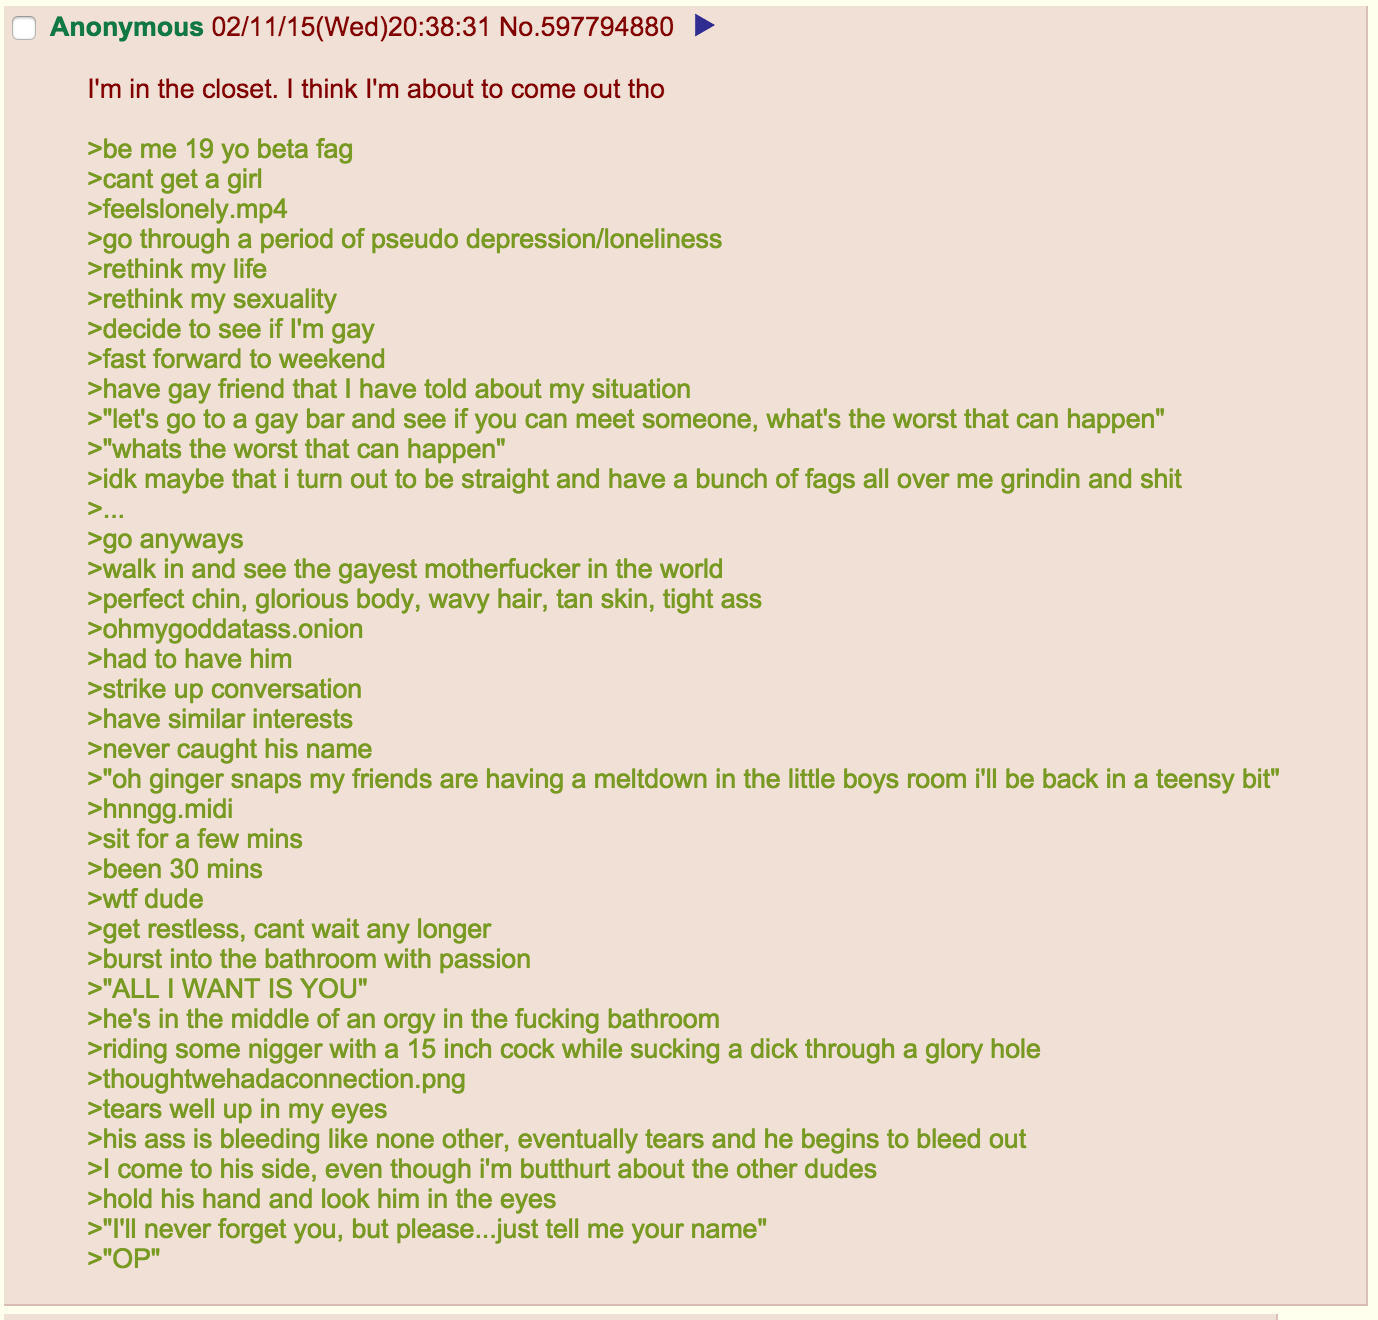 anon tries the gay thing